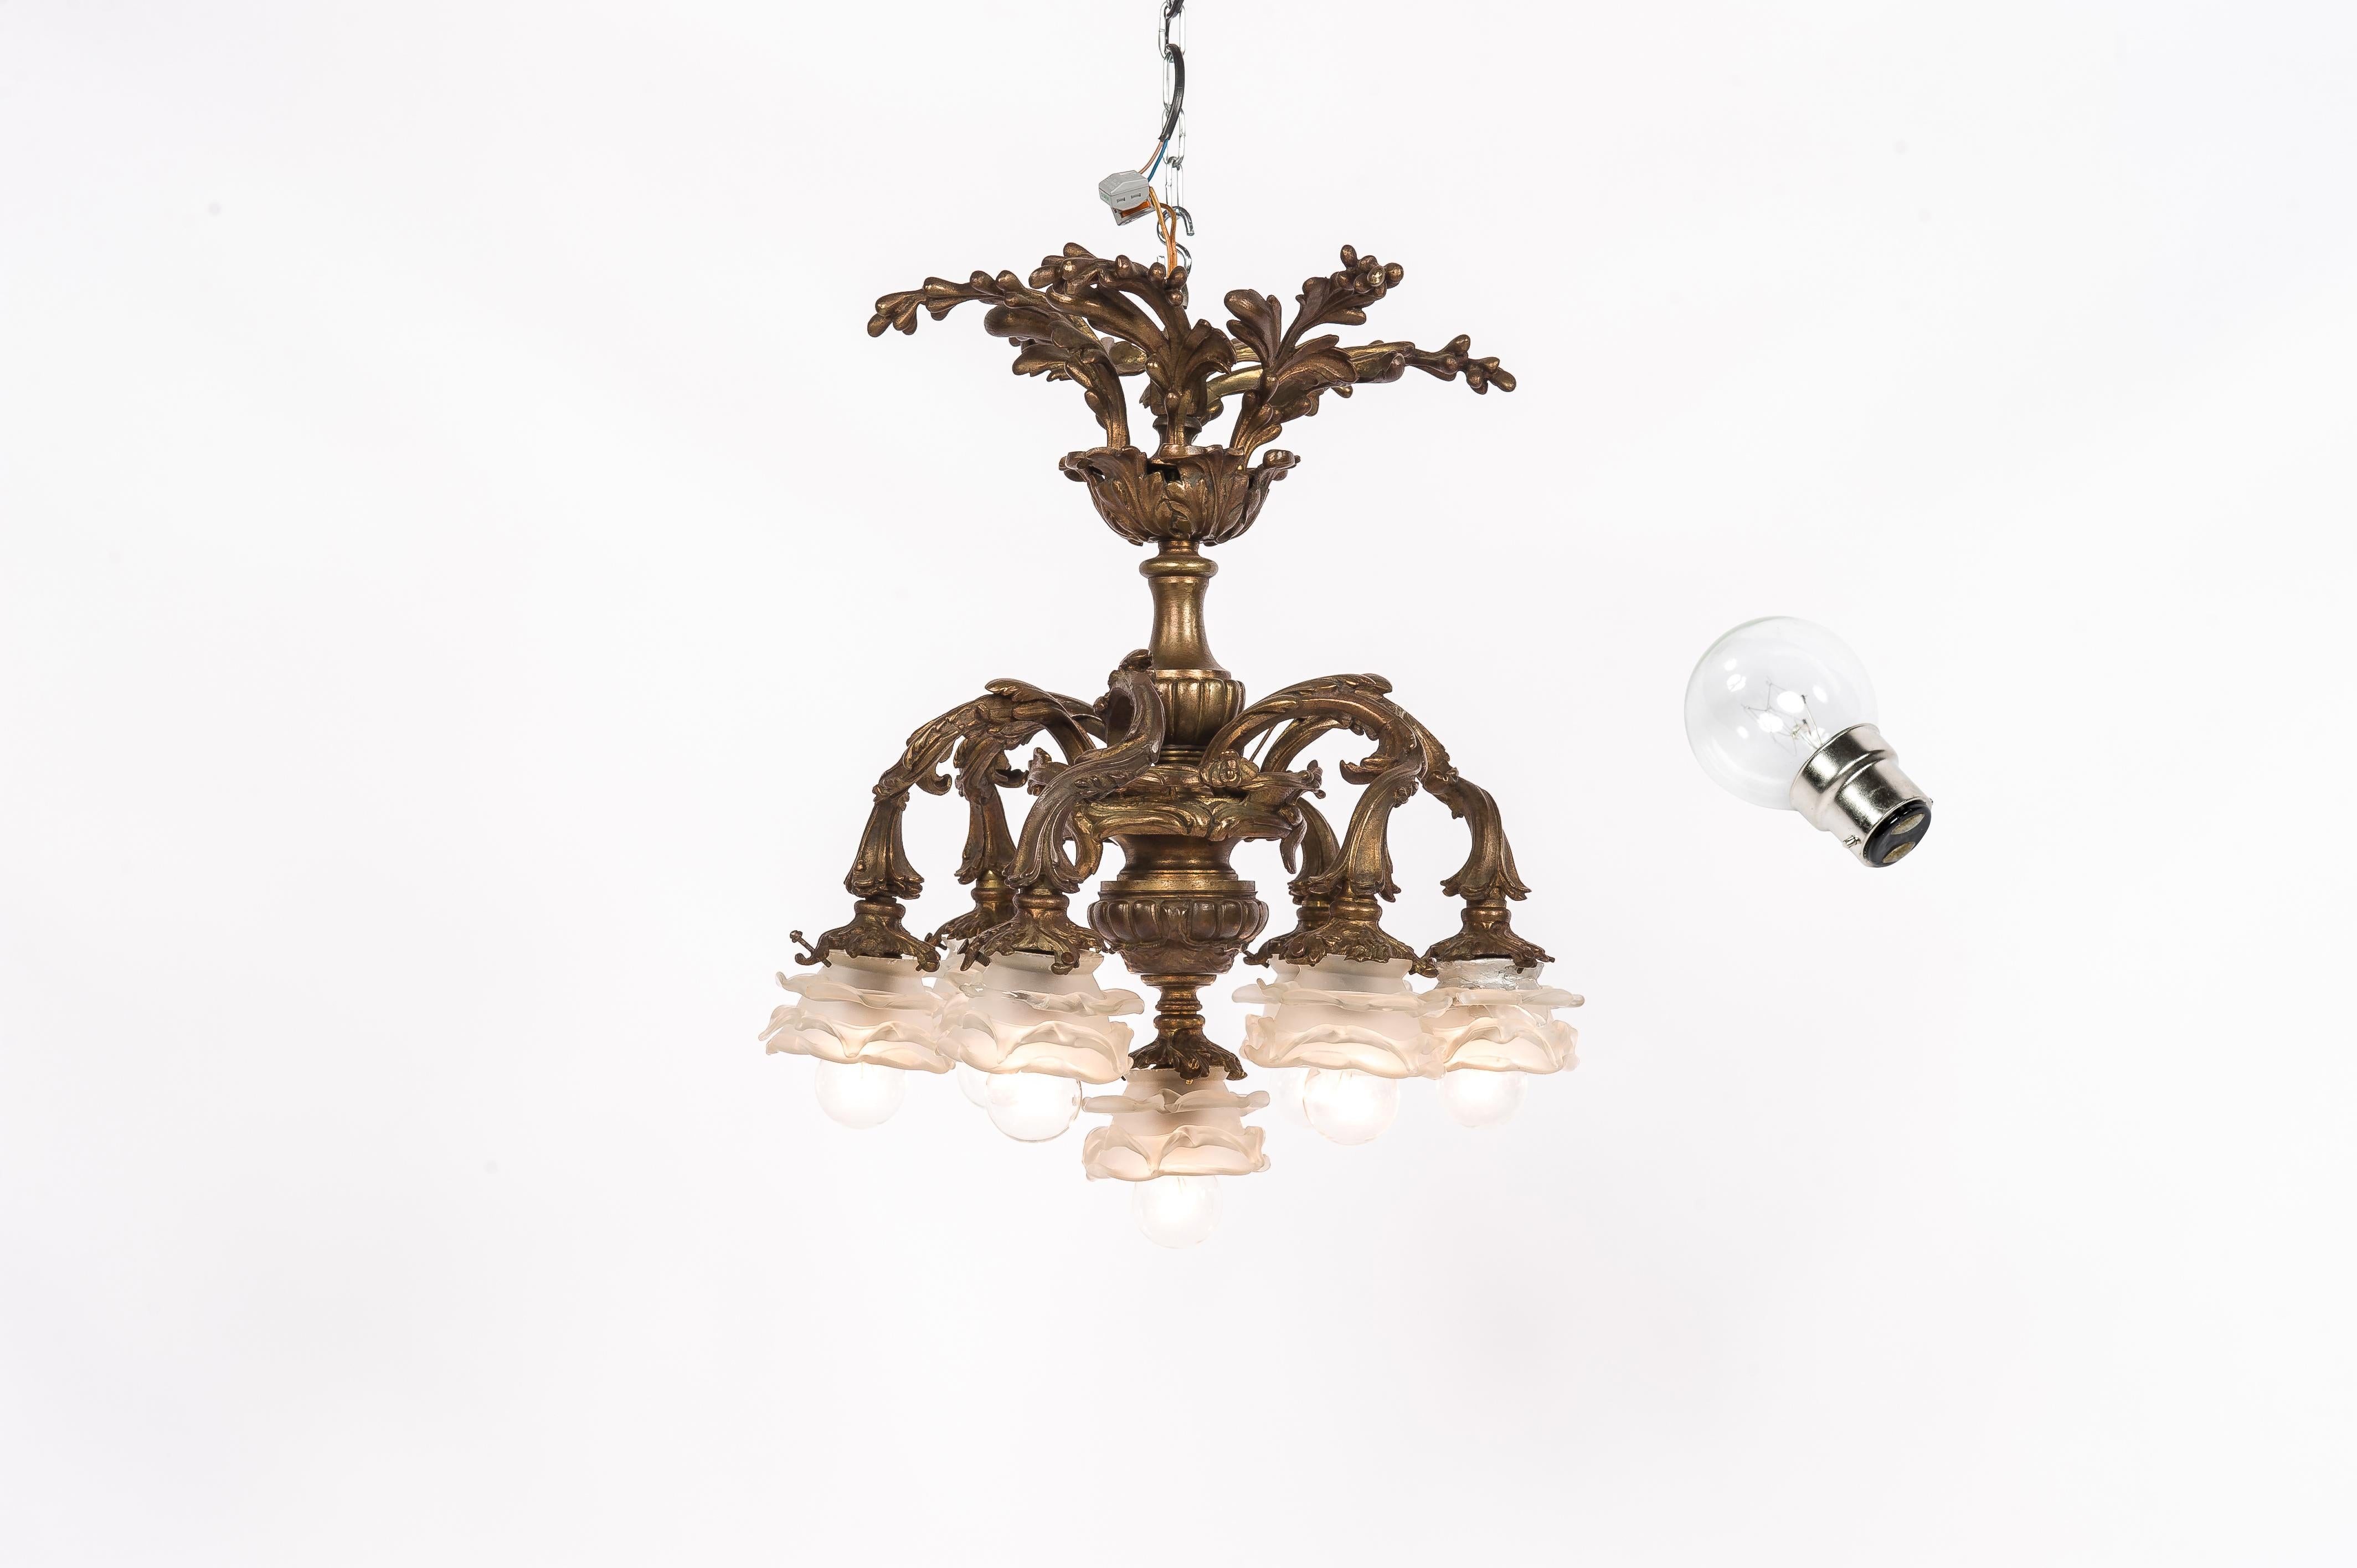 Antique 19th-Century French Brass Rococo or Louis XV Chandelier with 7 Lights In Good Condition For Sale In Casteren, NL